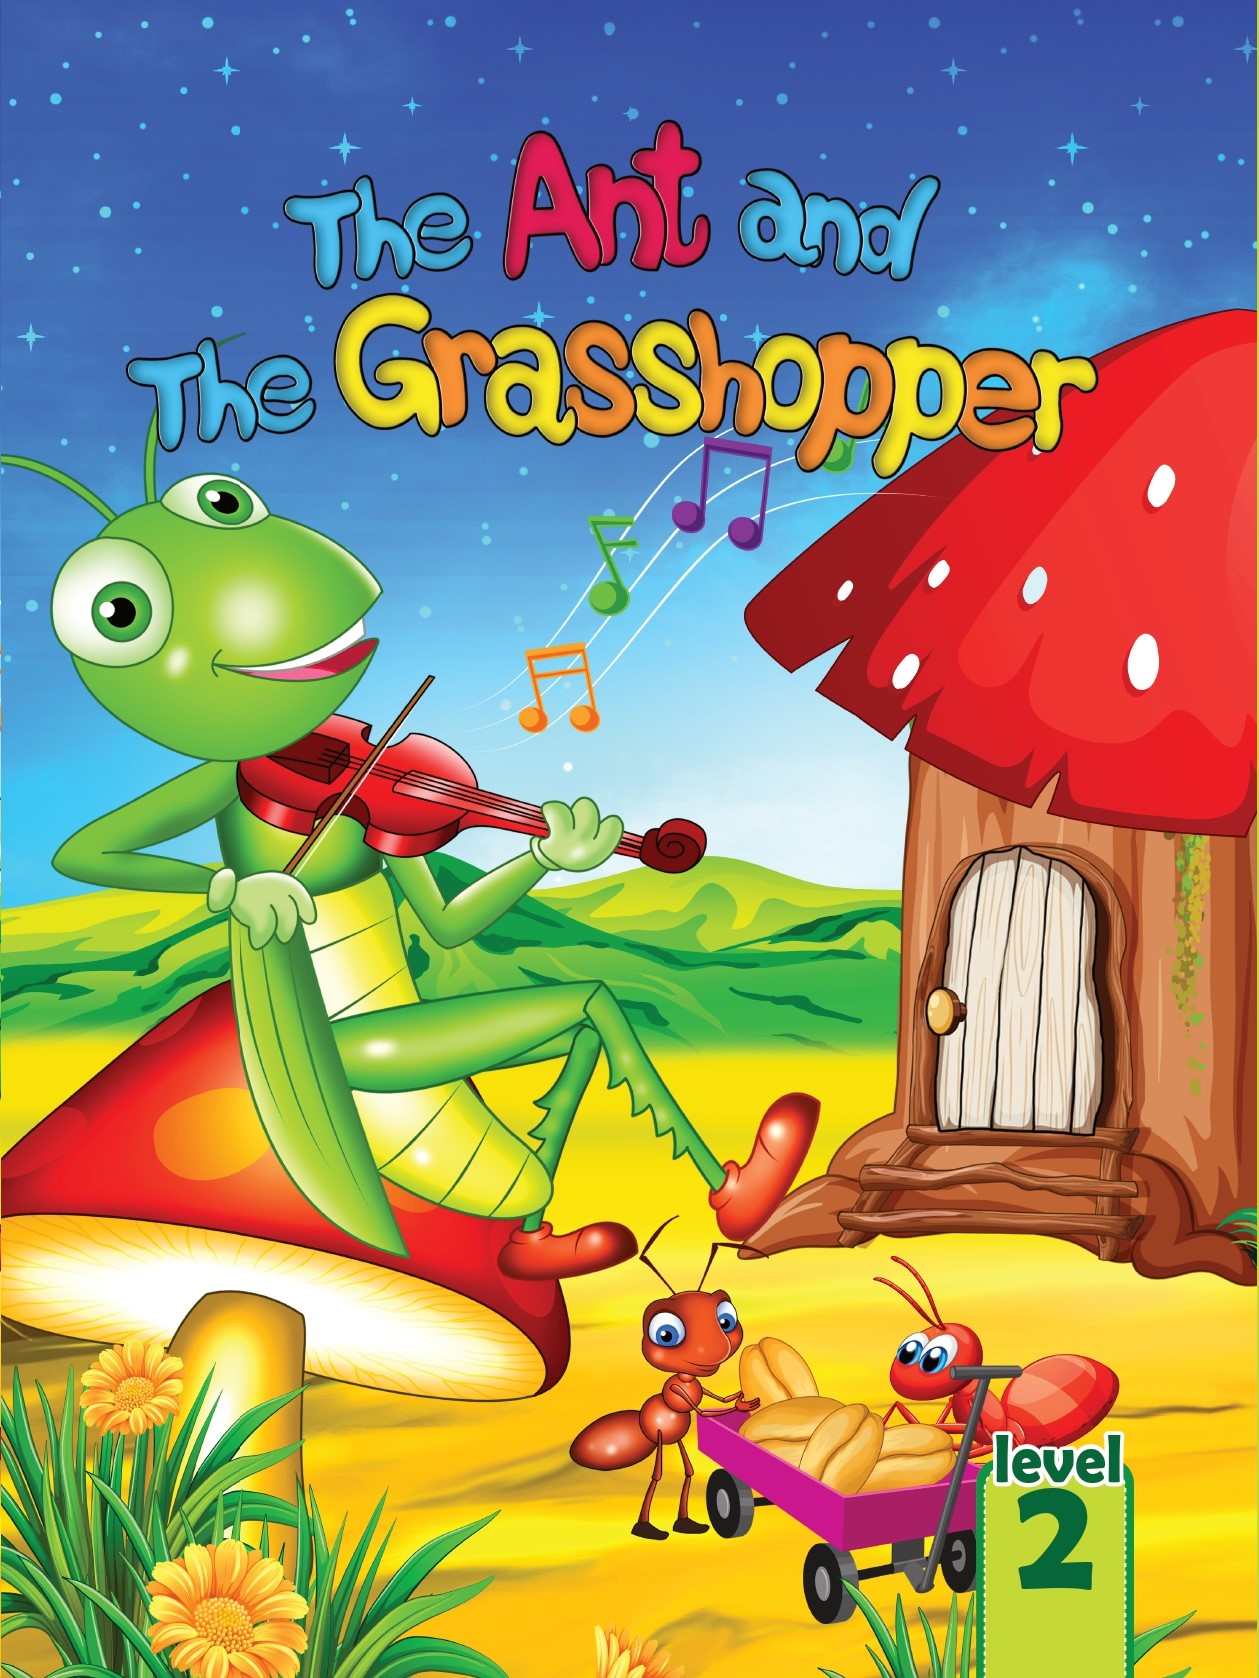 The Ant and The Grasshopper 